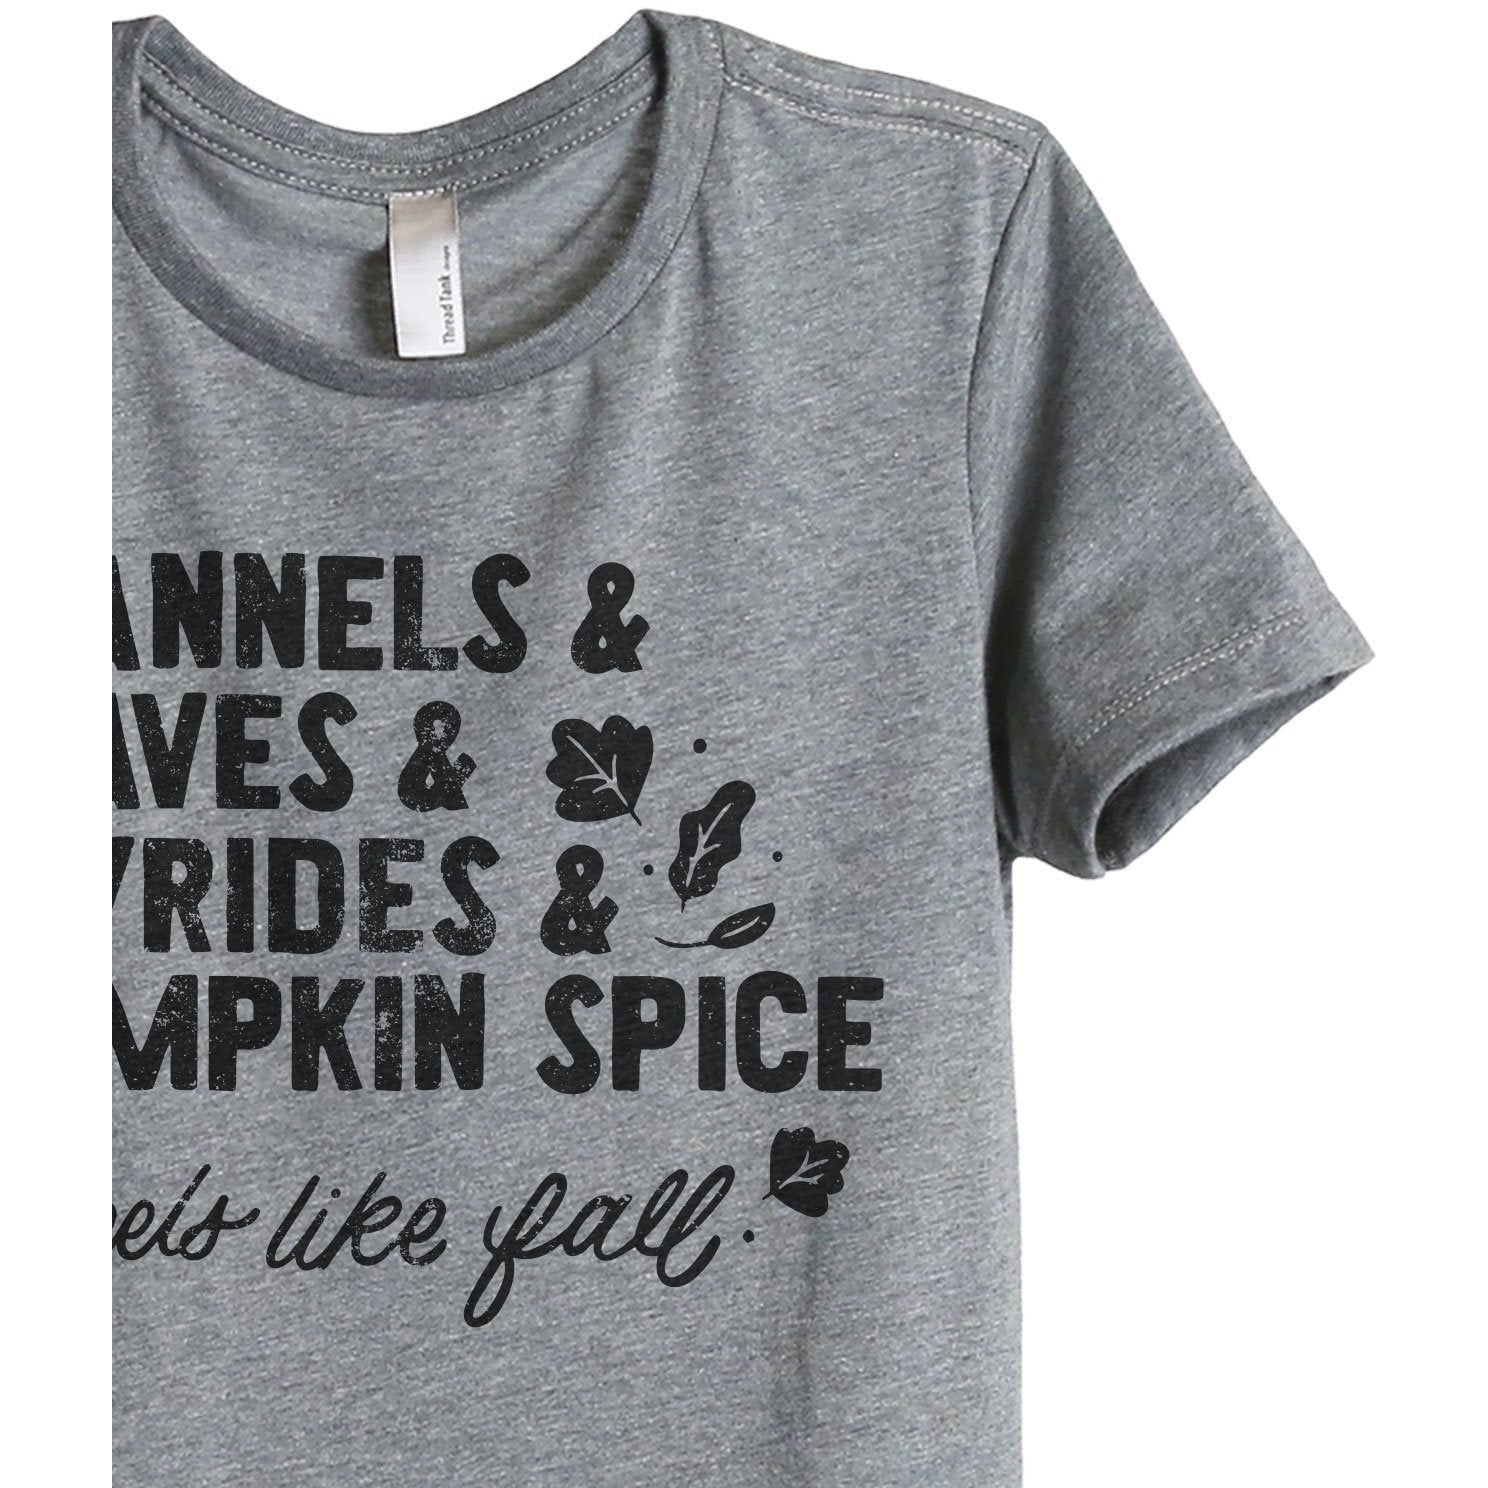 Flannels & Leaves & Hayrides & Pumpkin Spice...Feels like Fall Women's Relaxed Crewneck T-Shirt Top Tee Heather Grey Zoom Details
